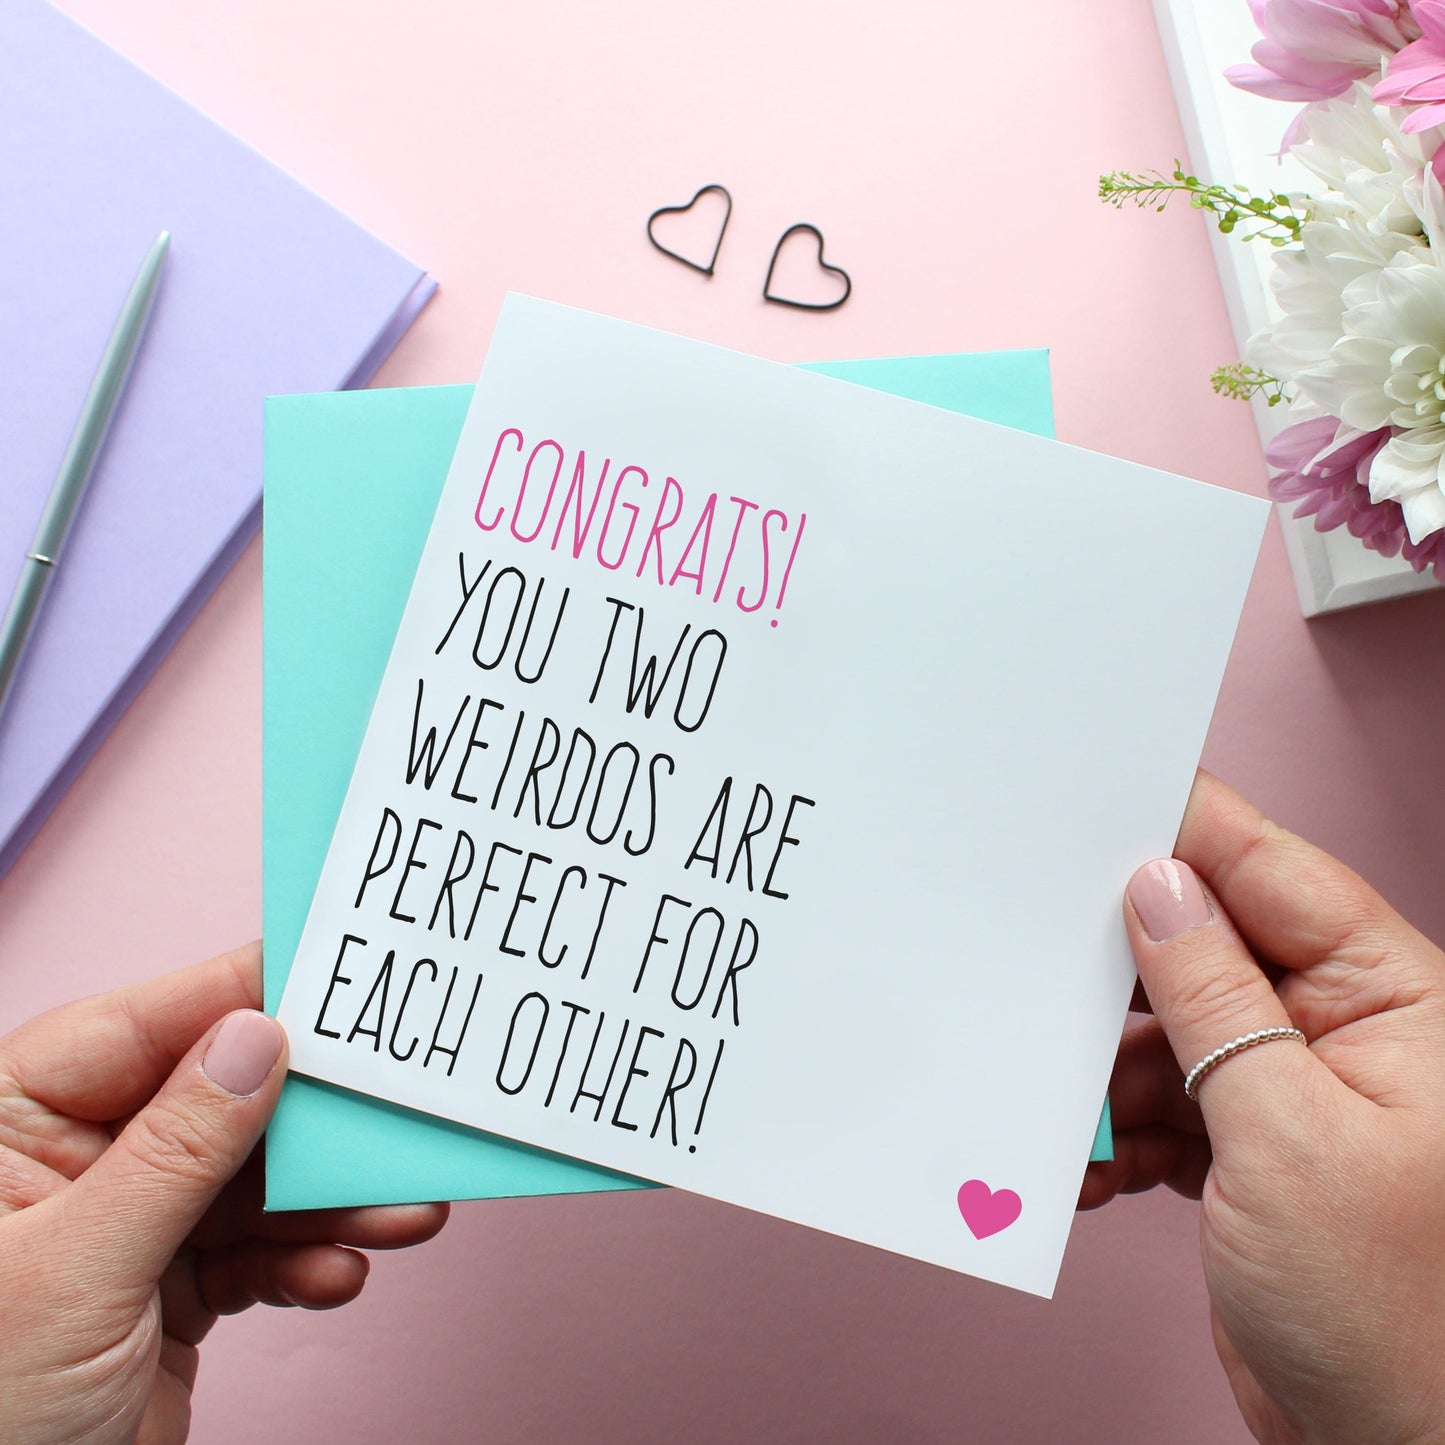 You two weirdos are perfect for each other card from Purple Tree Designs